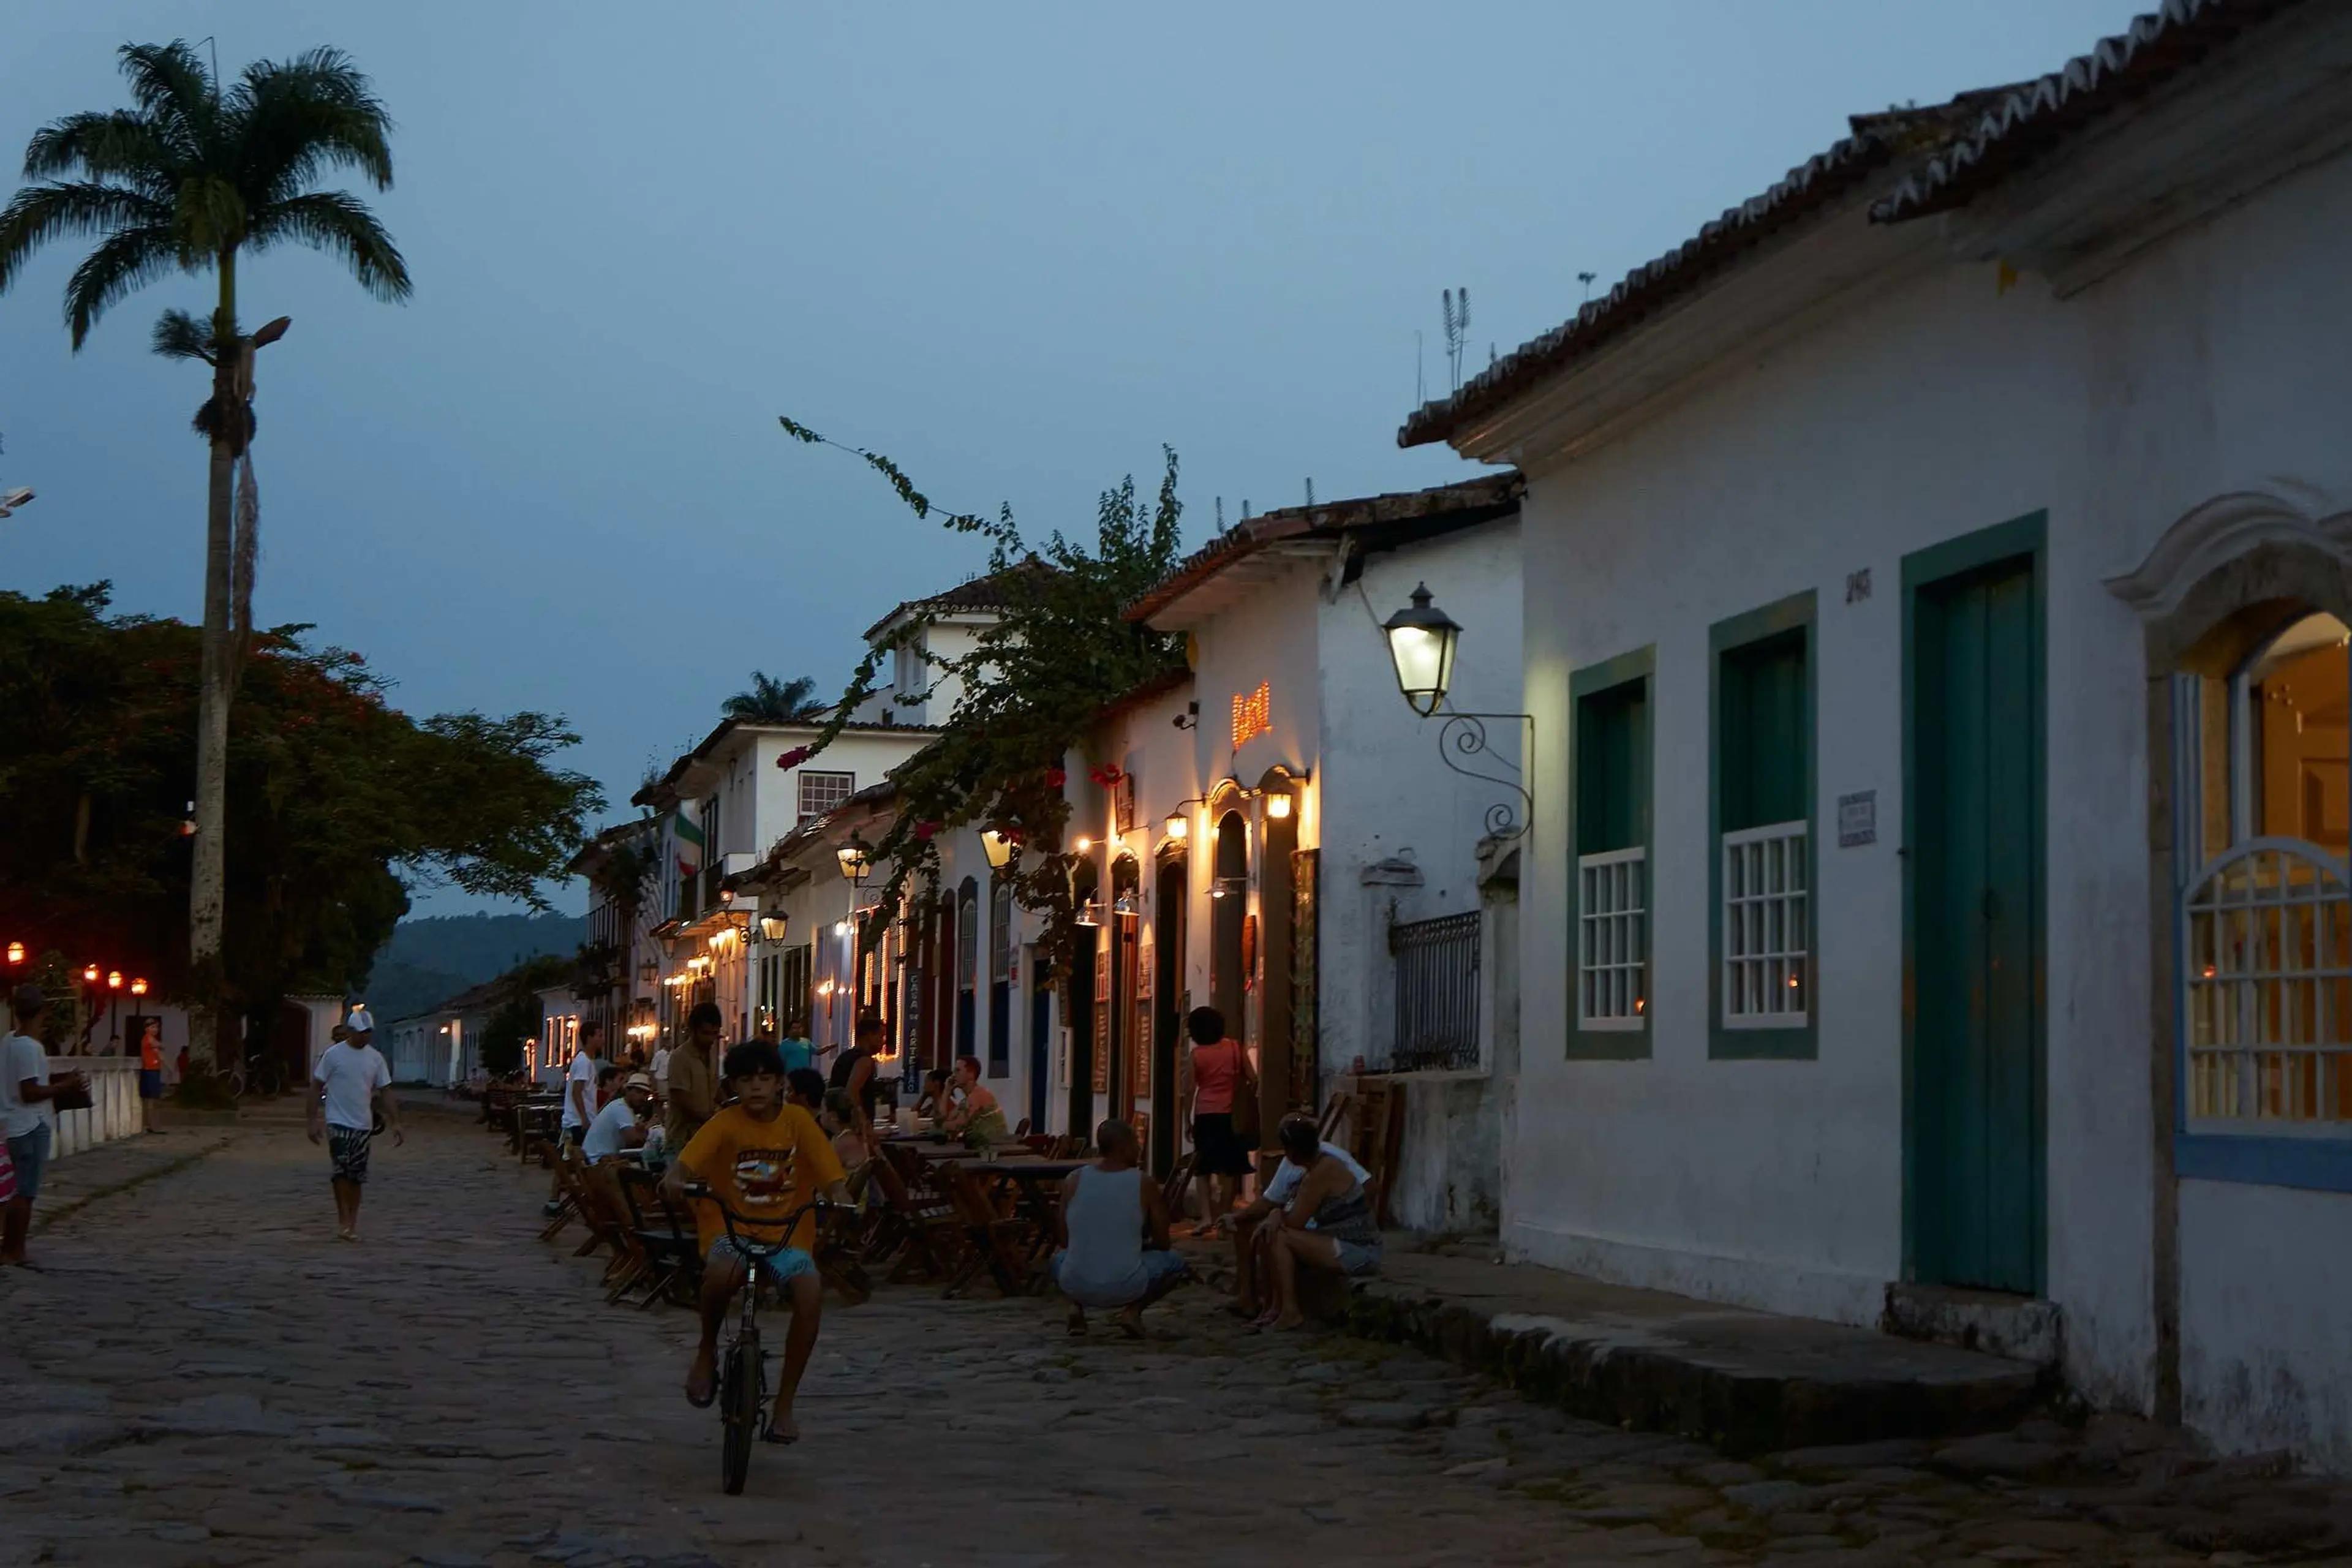 Paraty´s Historic Center dates back to the years 1820s. The Historic Center, considered by UNESCO as "the most harmonious colonial architectonic set"